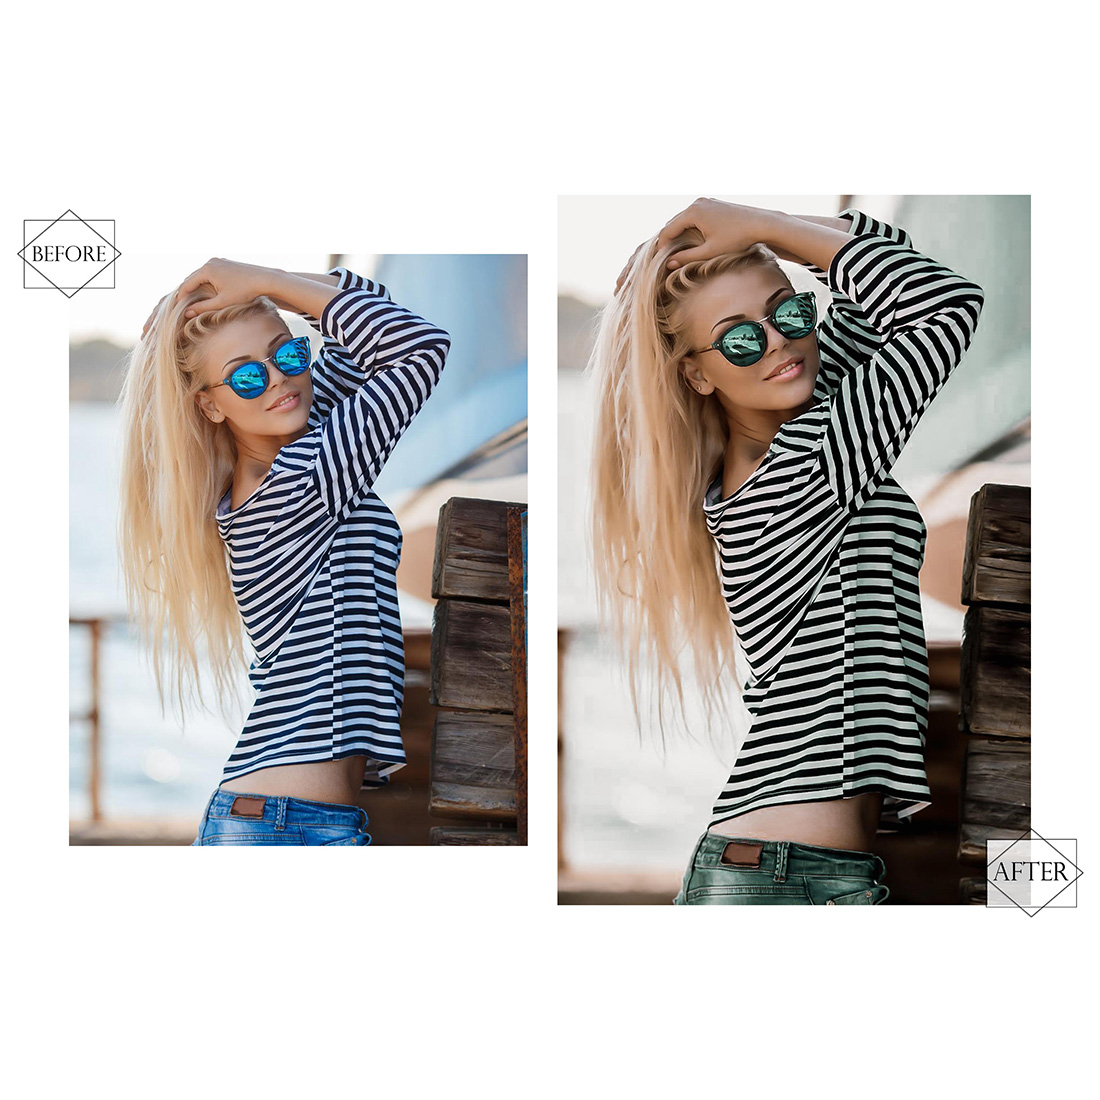 12 Photoshop Actions, Woodgrains Ps Action, Green ACR Preset, Brown Filter, Lifestyle Theme For Instagram, Spring Moody, Warm Portrait preview image.